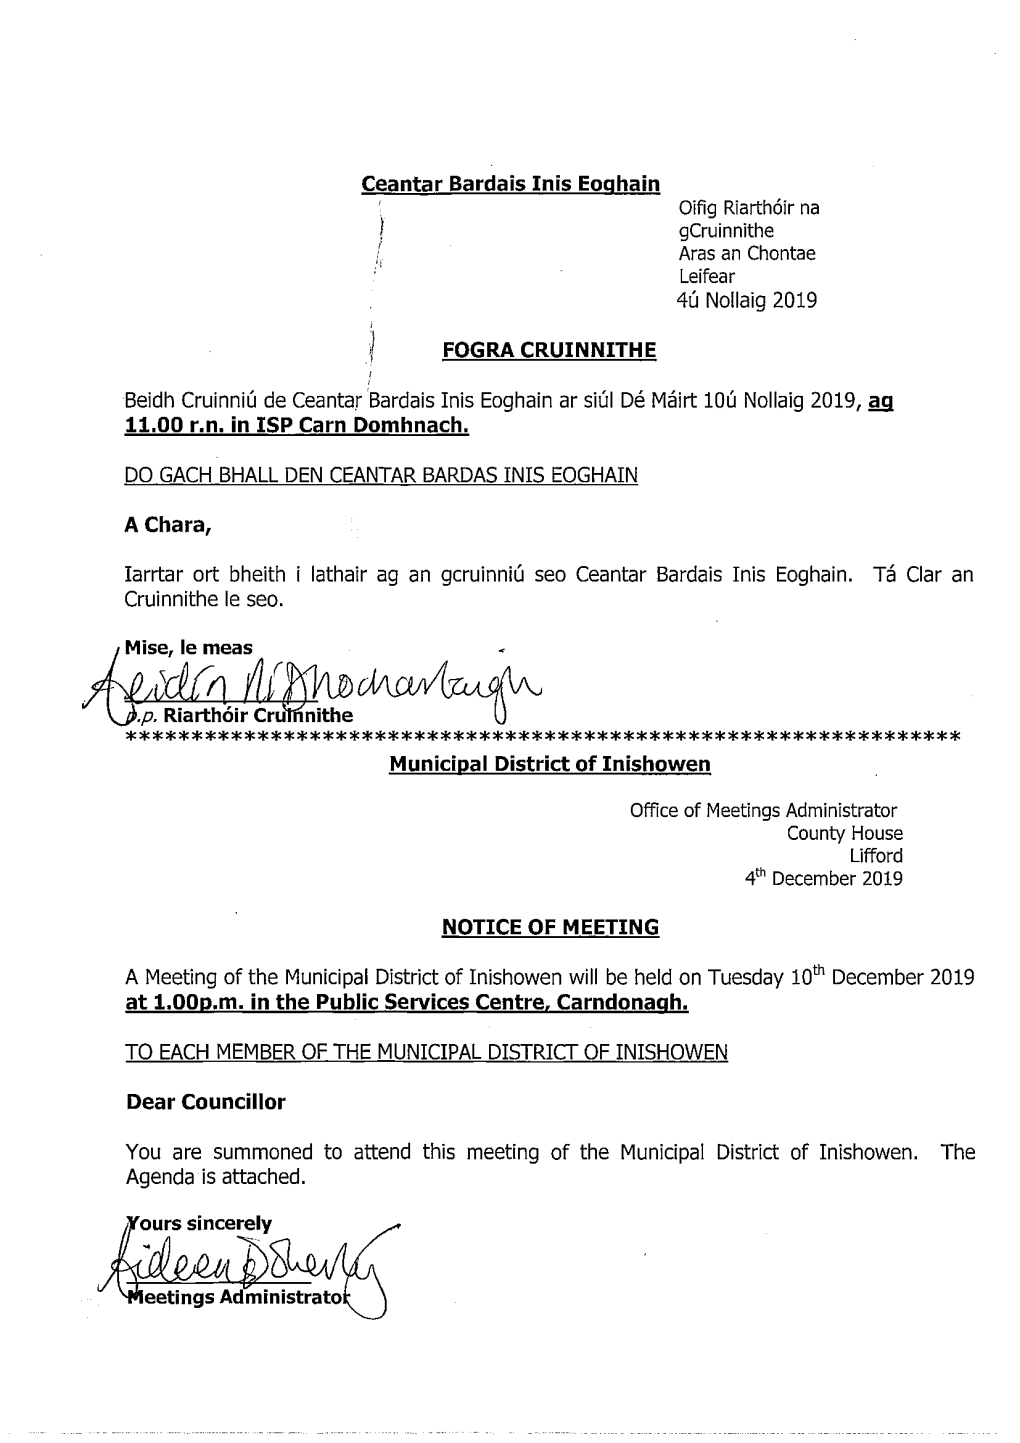 MINUTES of the INISHOWEN MUNICIPAL DISTRICT MEETING HELD in the PUBLIC SERVICES CENTRE, CARNDONAGH on THURSDAY 24TH OCTOBER 2019 at 1.00Pm